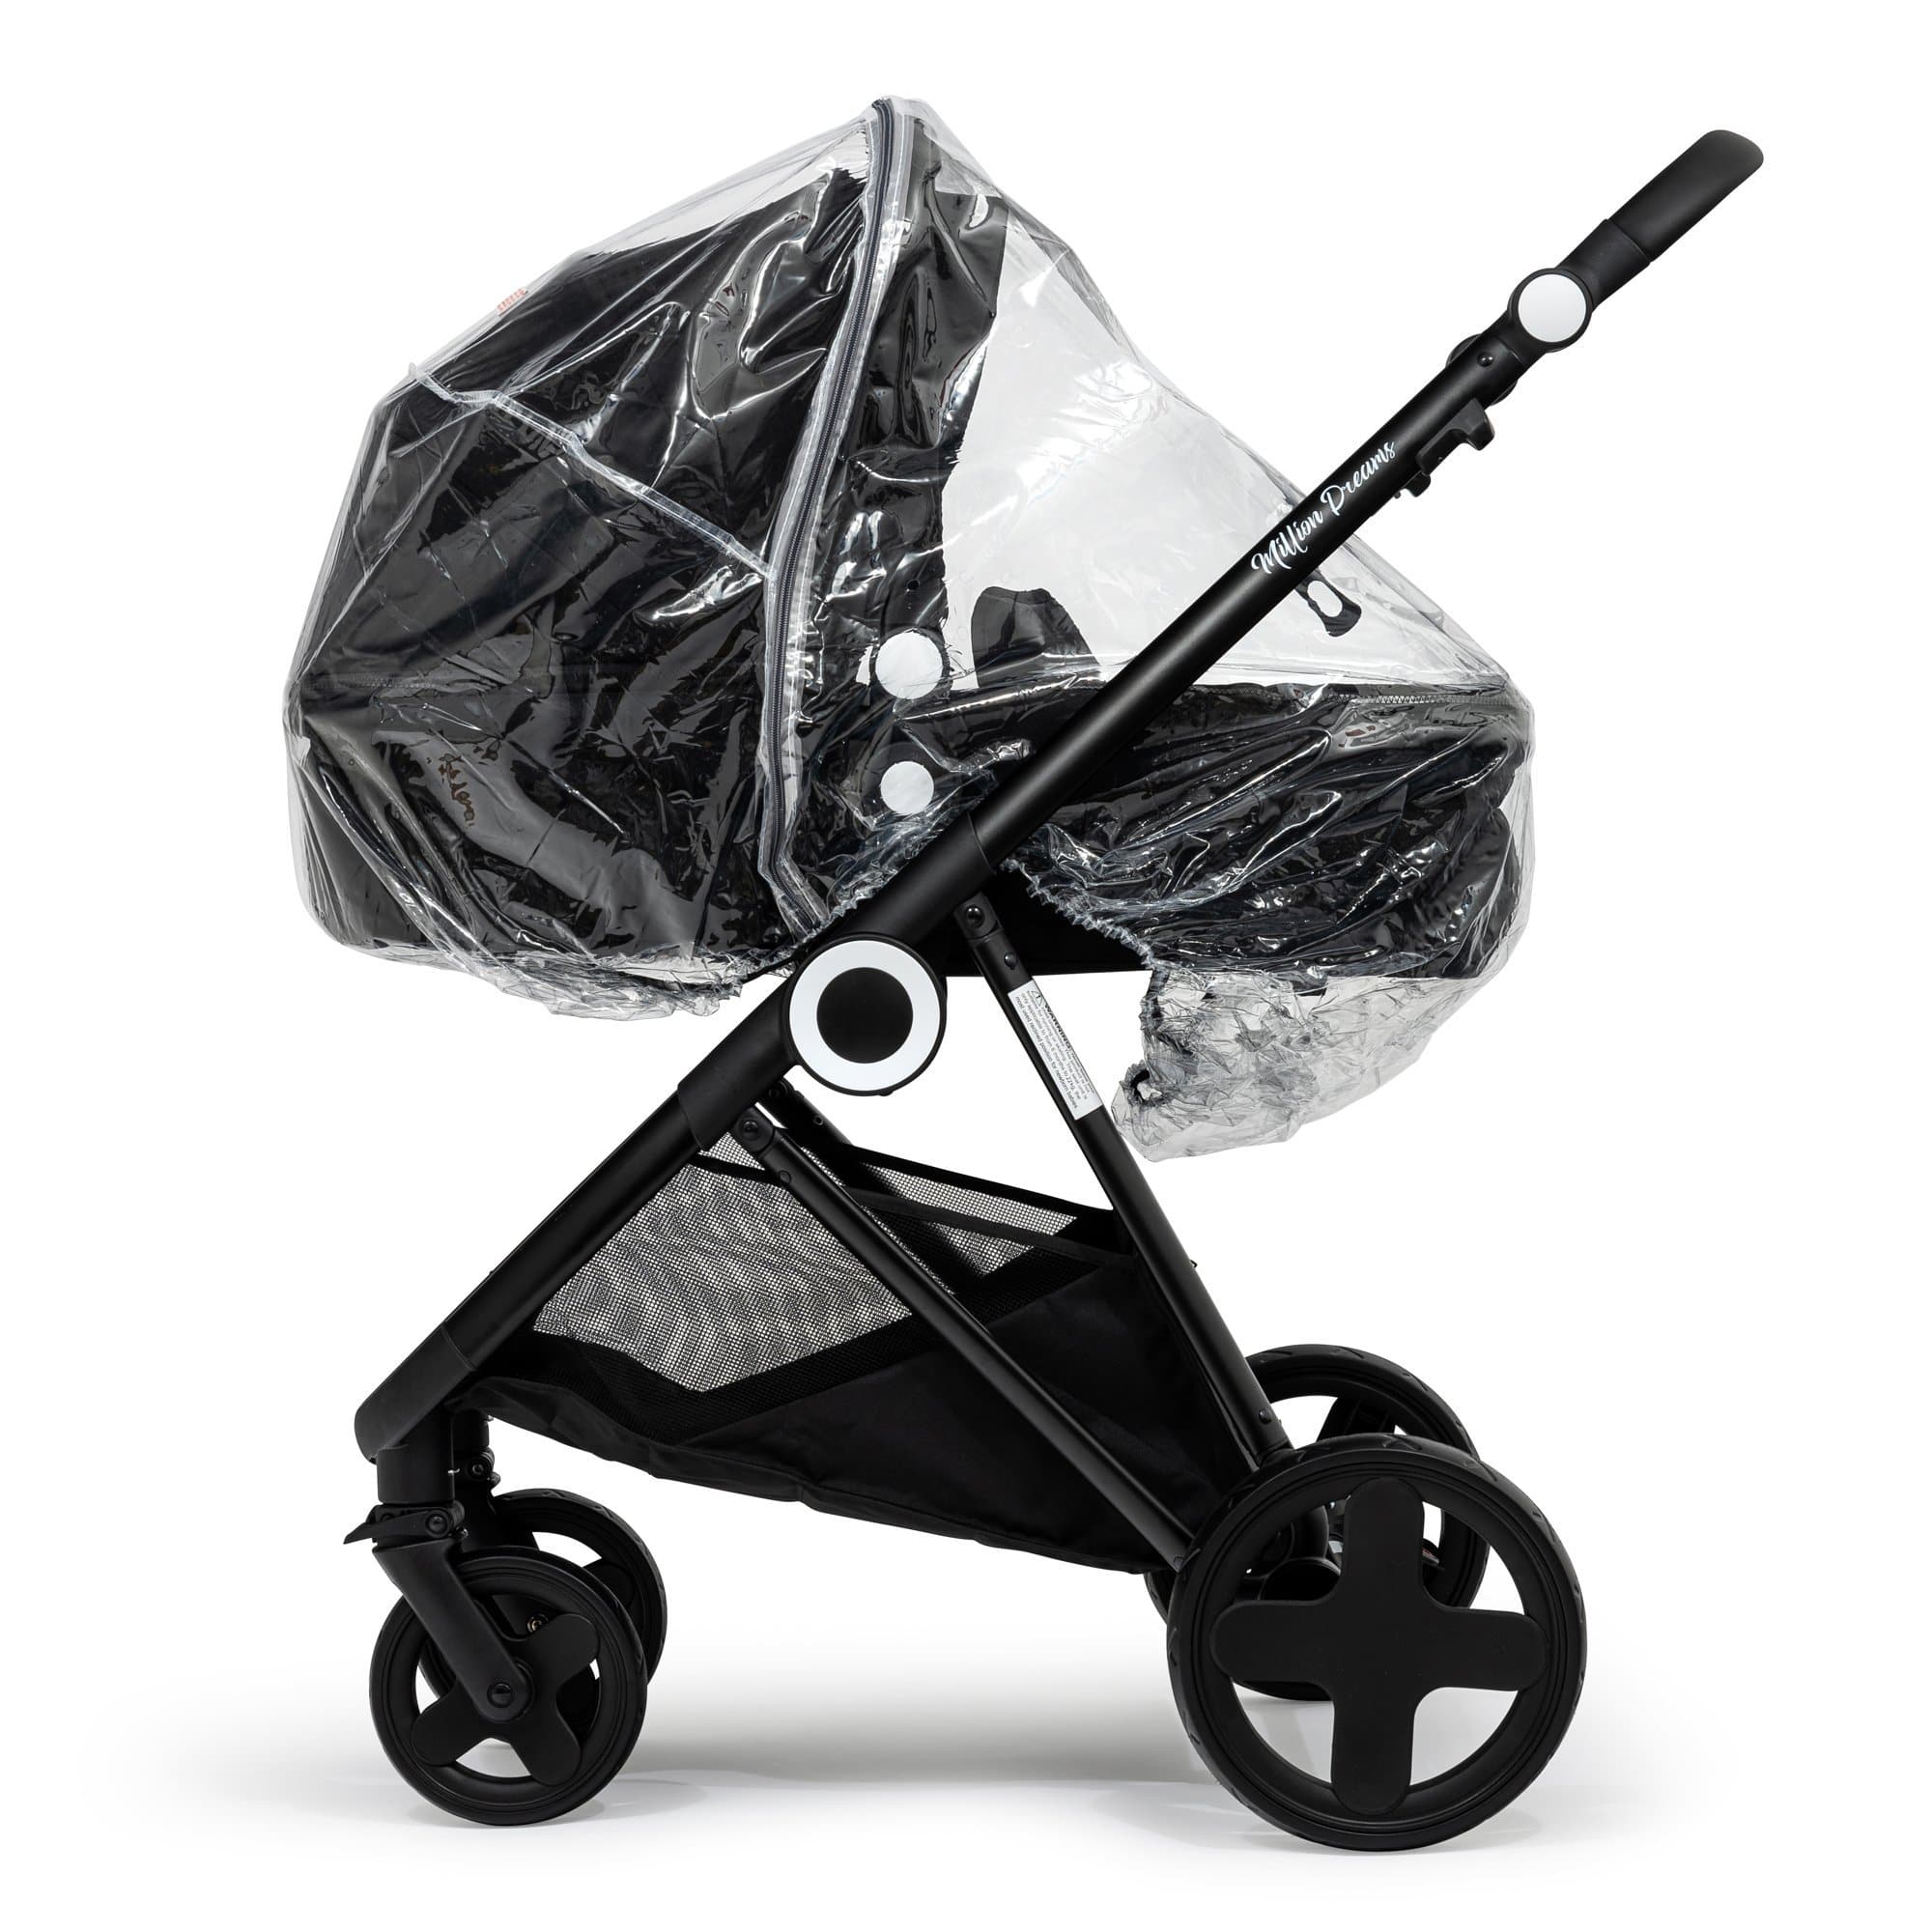 2 in 1 Rain Cover Compatible with Graco - Fits All Models - For Your Little One